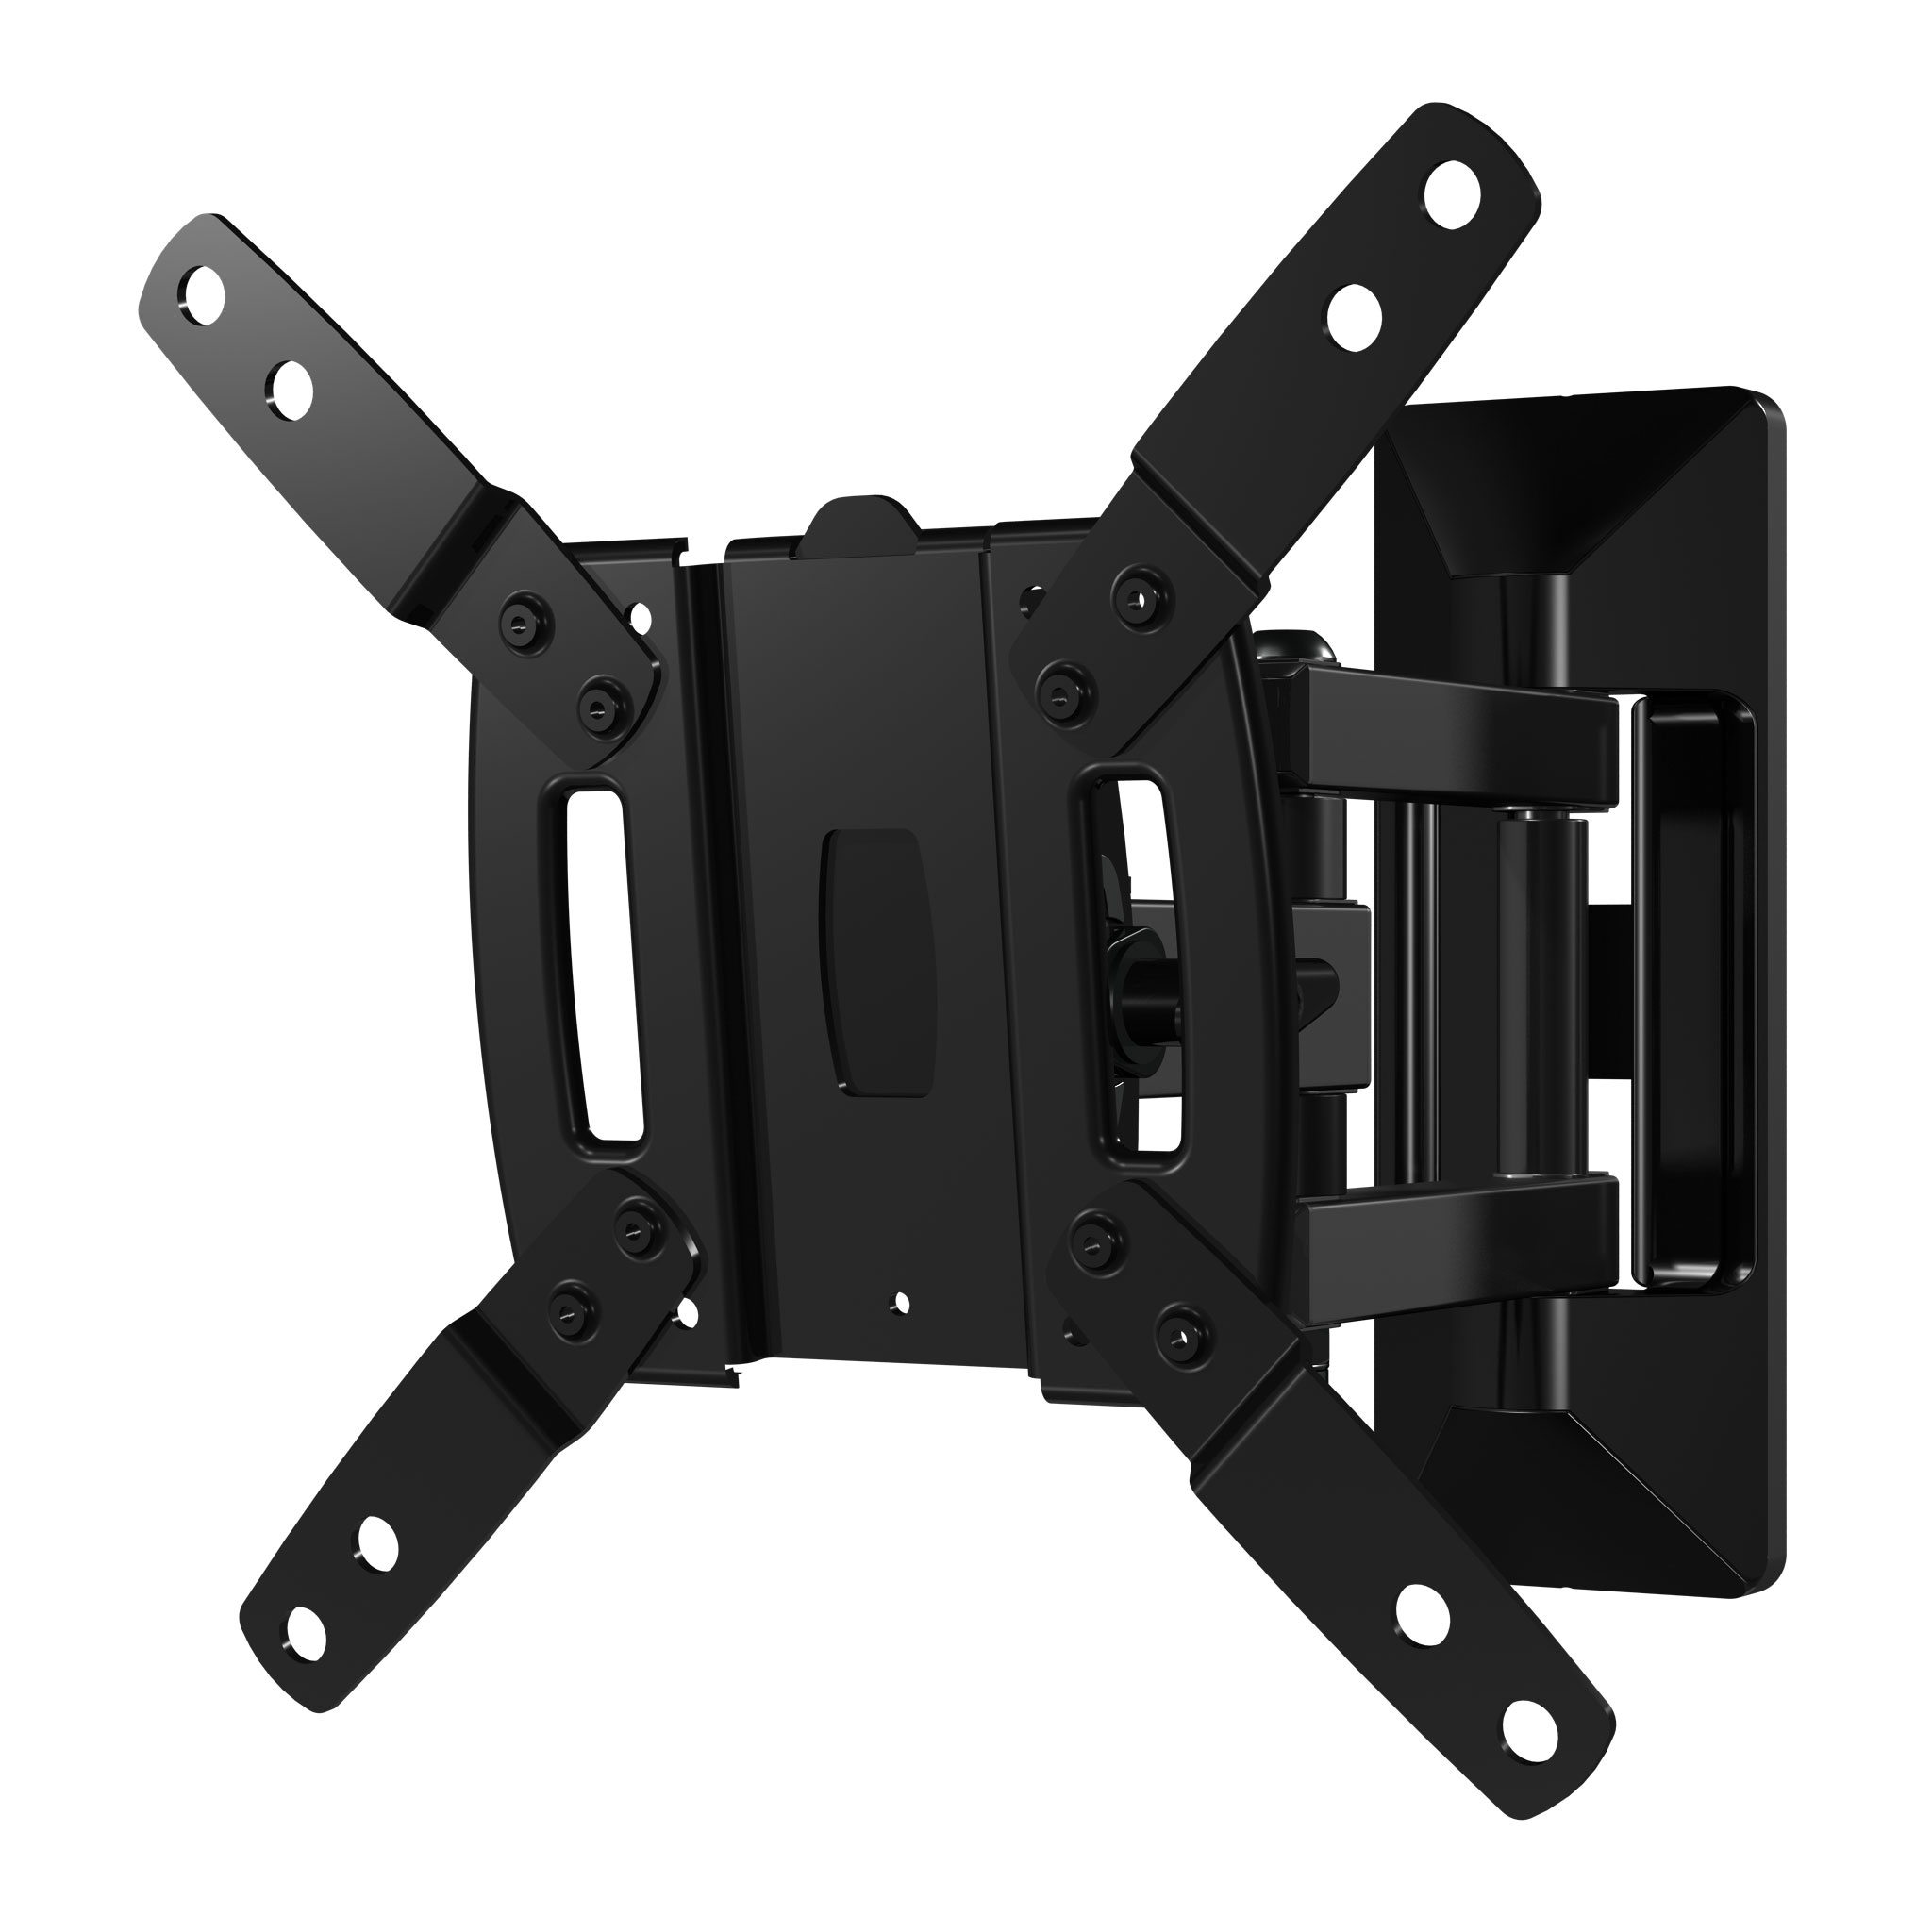 19 to 40-in Full Motion Indoor Wall TV Mount Fits TVs up to 40-in (Hardware Included) in Black | - Sanus LSF110-B1